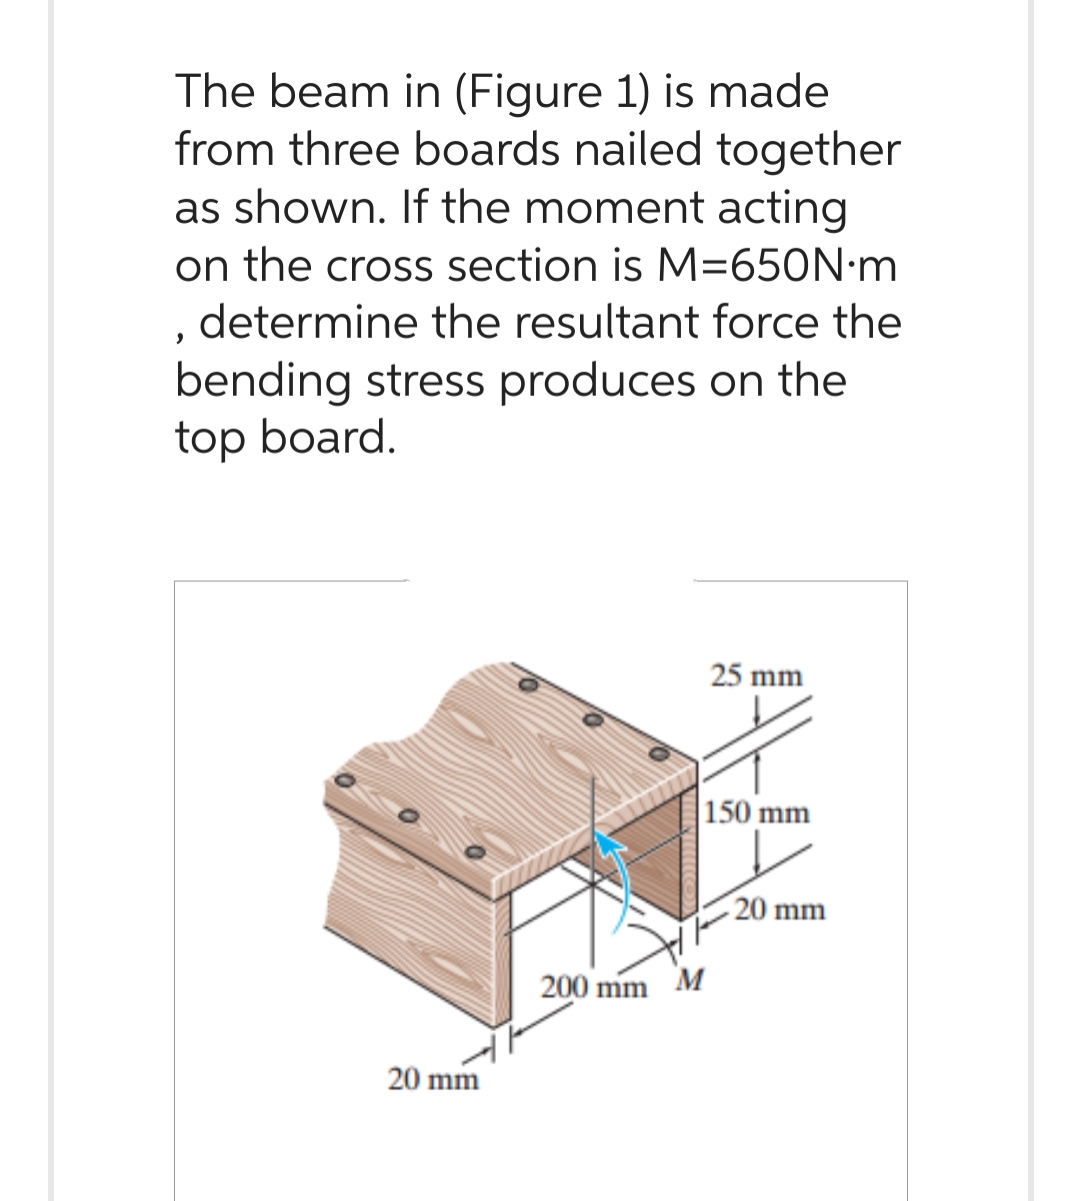 The beam in (Figure 1) is made
from three boards nailed together
as shown. If the moment acting
on the cross section is M=650N.m
determine the resultant force the
bending stress produces on the
top board.
"
20 mm
200 mm M
25 mm
150 mm
20 mm